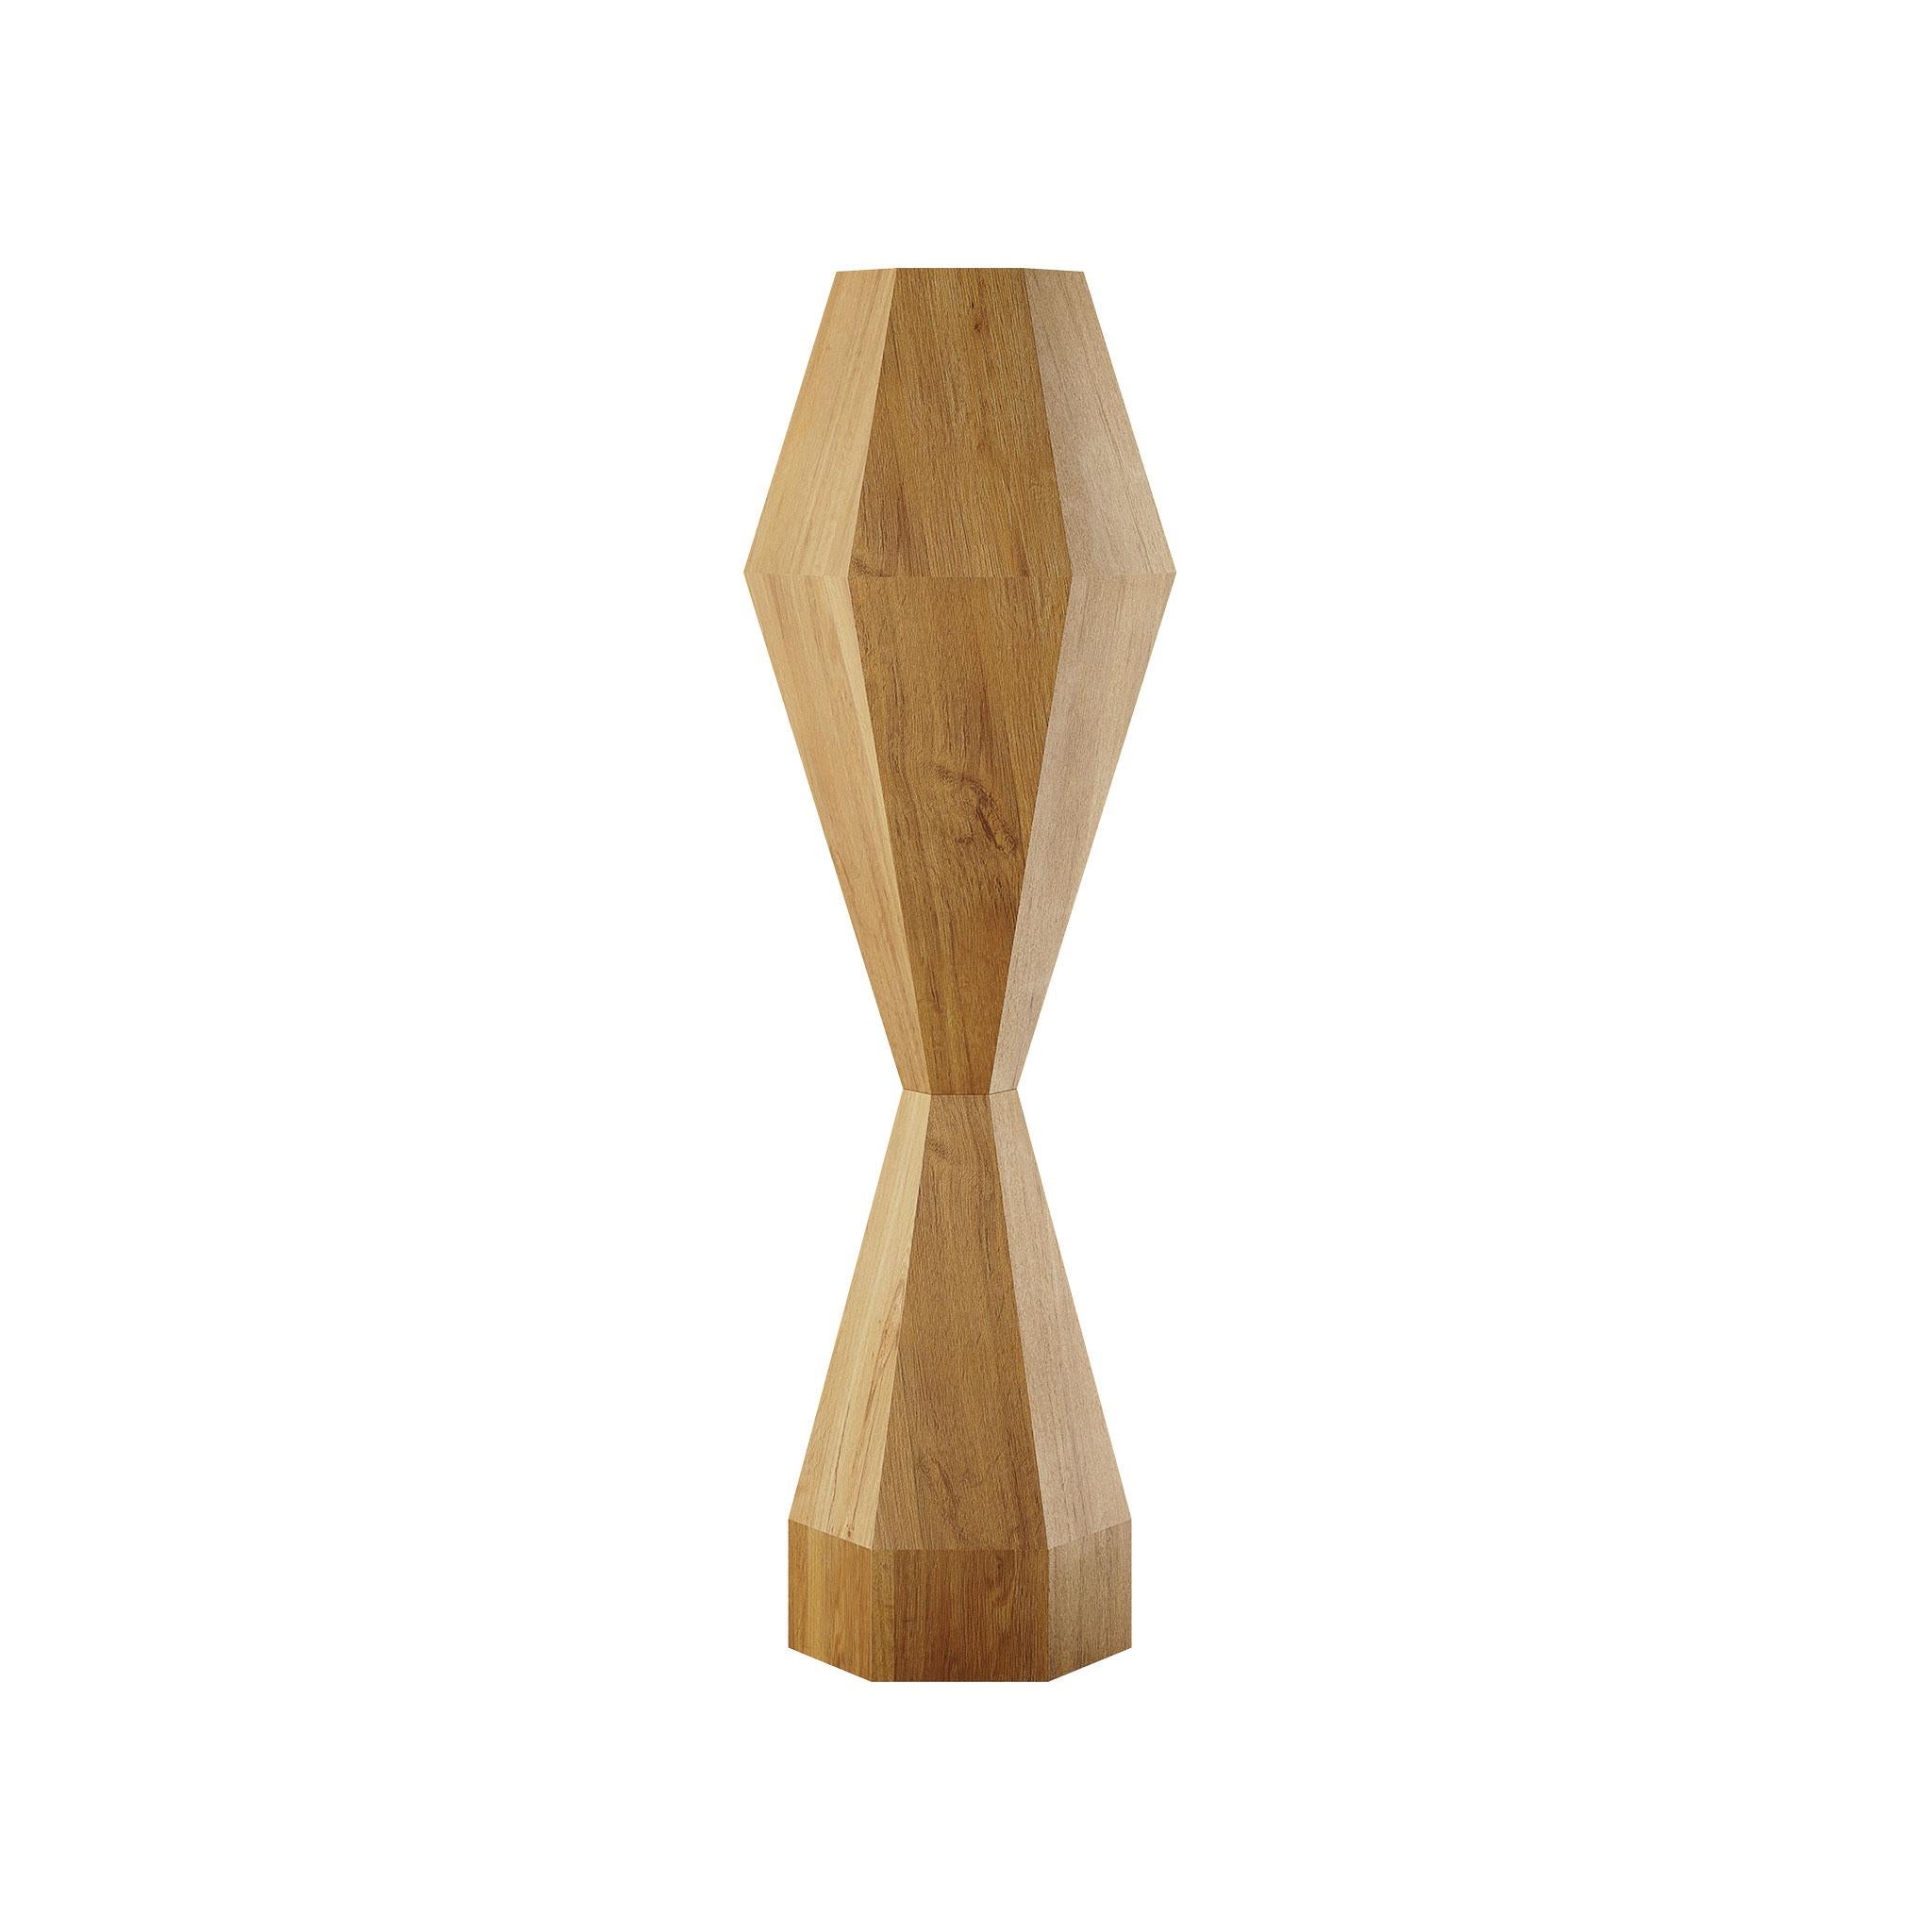 Introduce a unique and contemporary piece into your decor with our Contemporary Faceted Totem in Oak Wood Veneer, an expression of the 21st century, meticulously hand-carved and handcrafted. This totem is not just a decorative object but a